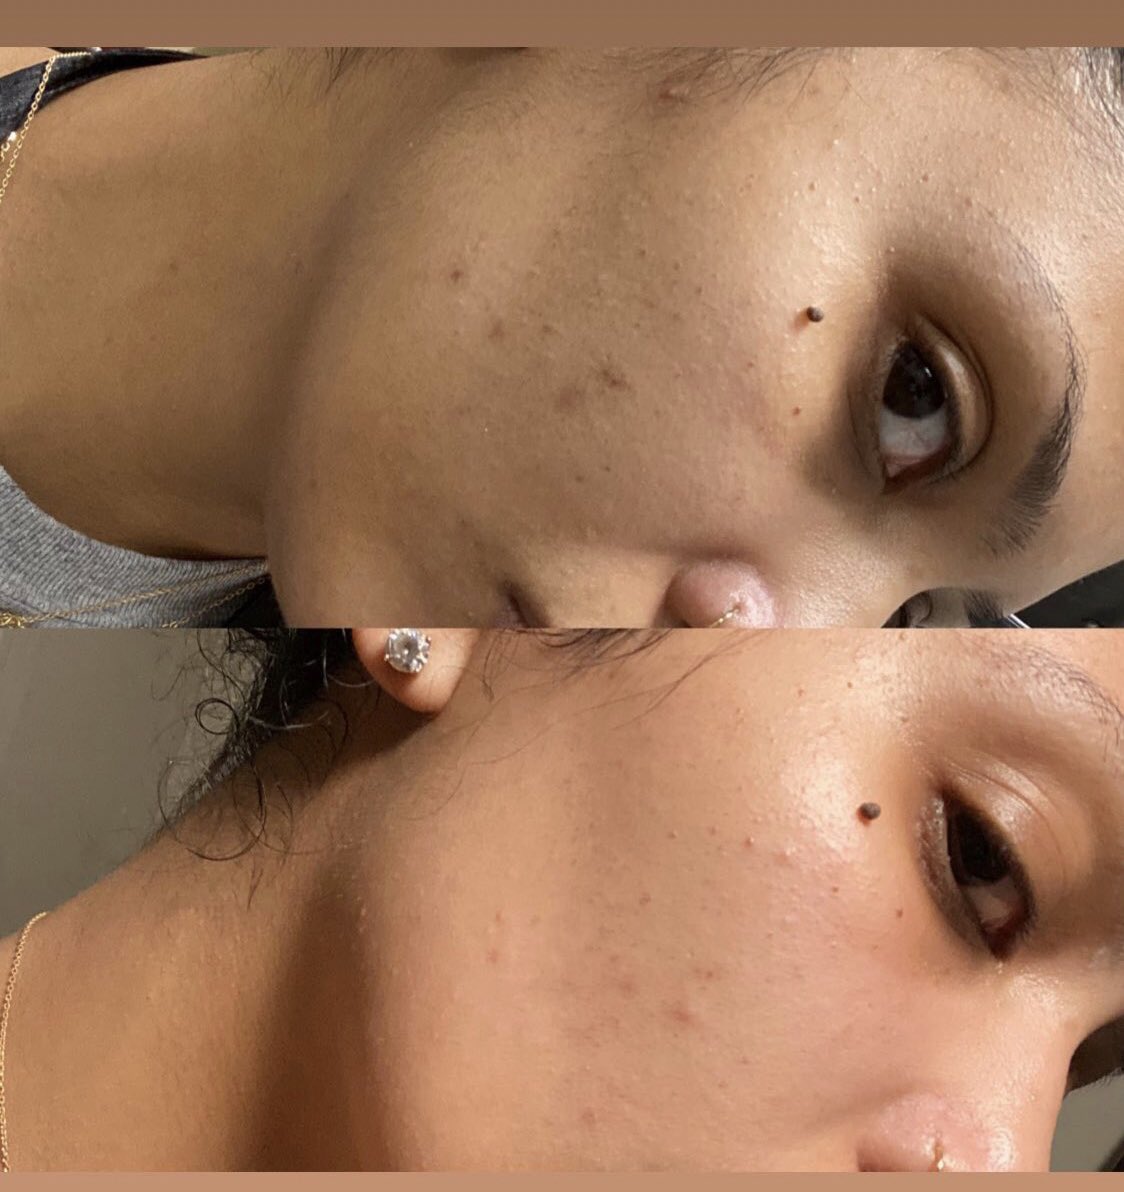 Our gorgeous client has been using our turmeric scrub and literally life moisturizer consistently and she is absolutely glowing AND the after picture is BEFORE moisturizing! Amazing!  
Beautybeginshere3.com

#memphisesthetician #memphisskincare